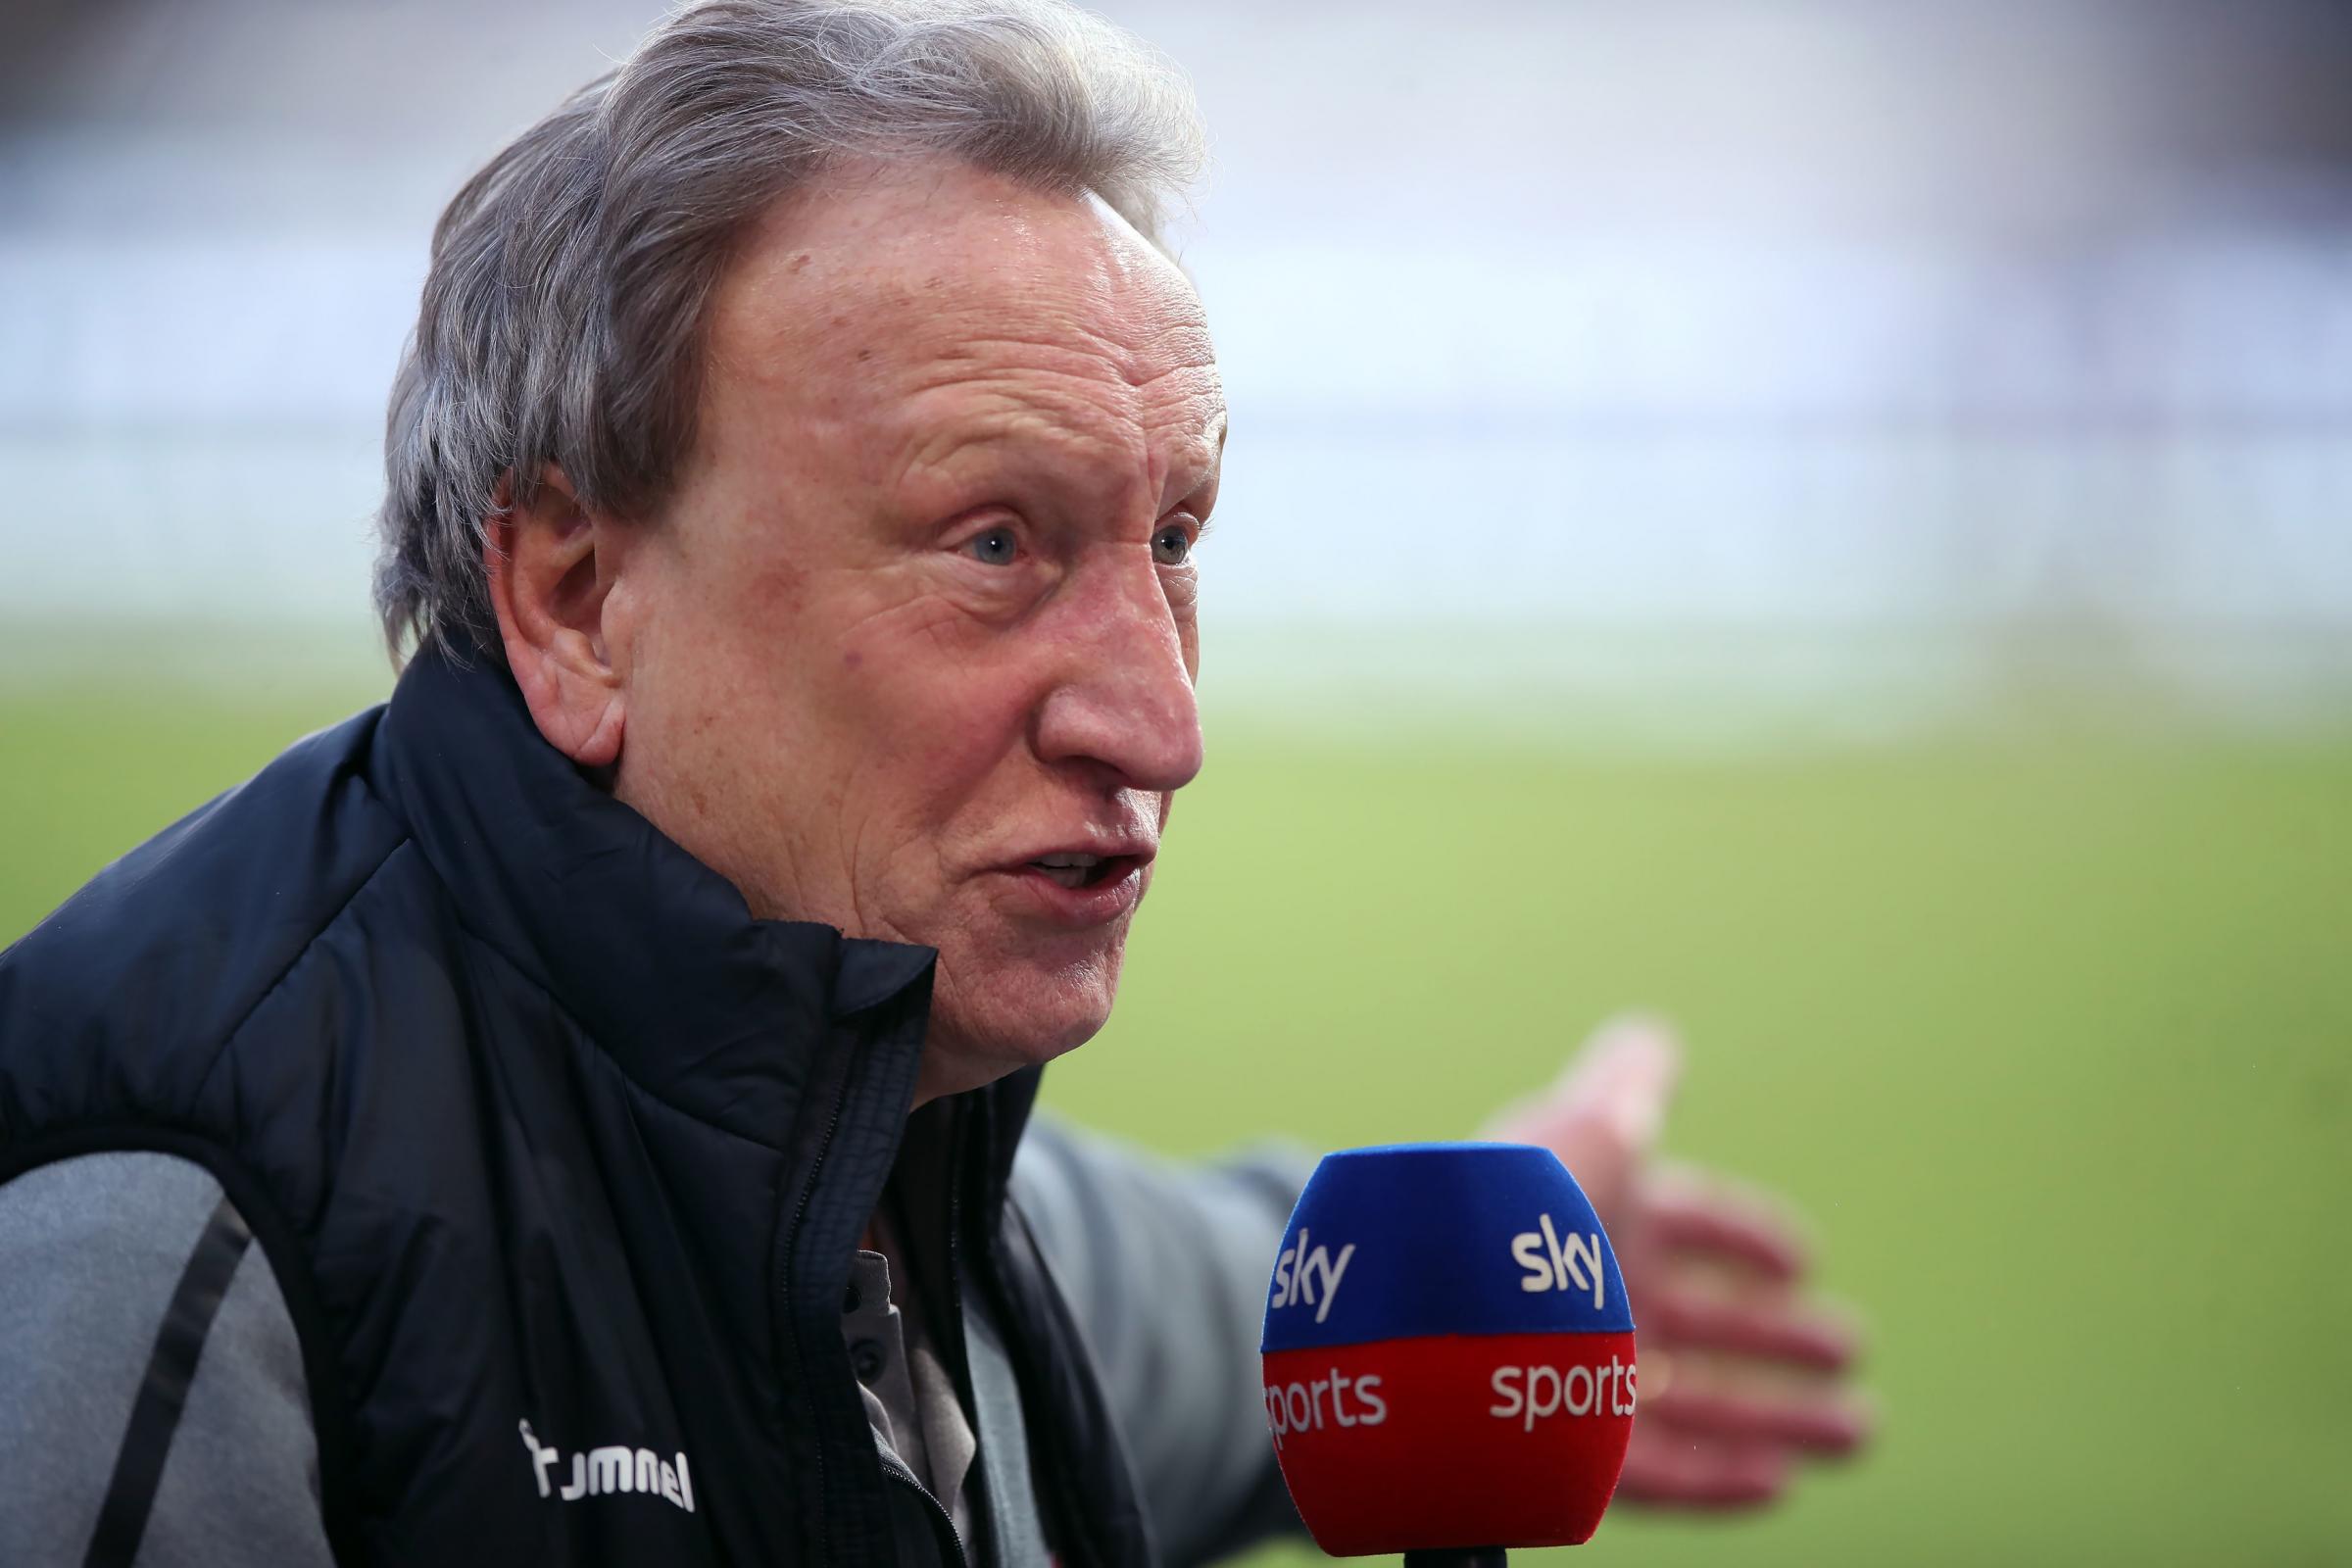 Neil Warnock says next three games will make or break Middlesbrough's play-off hopes